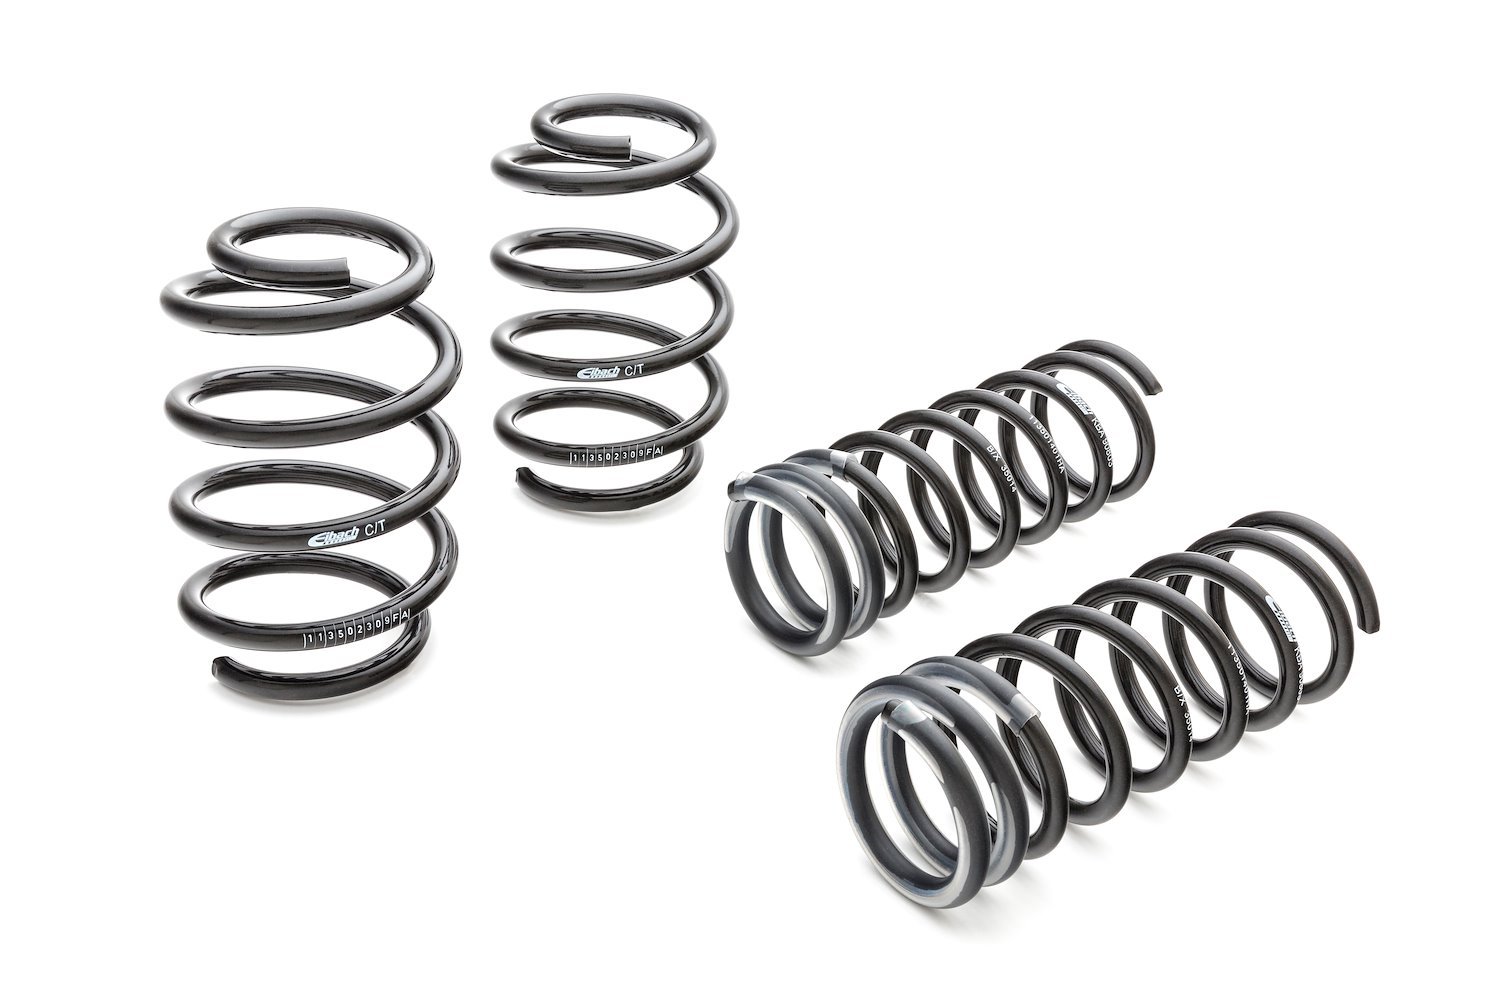 3530.140 Pro-Kit Lowering Springs 1994-2004 Mustang V8 convertible - 1.300 in. Front/1.400 in. Rear Drop